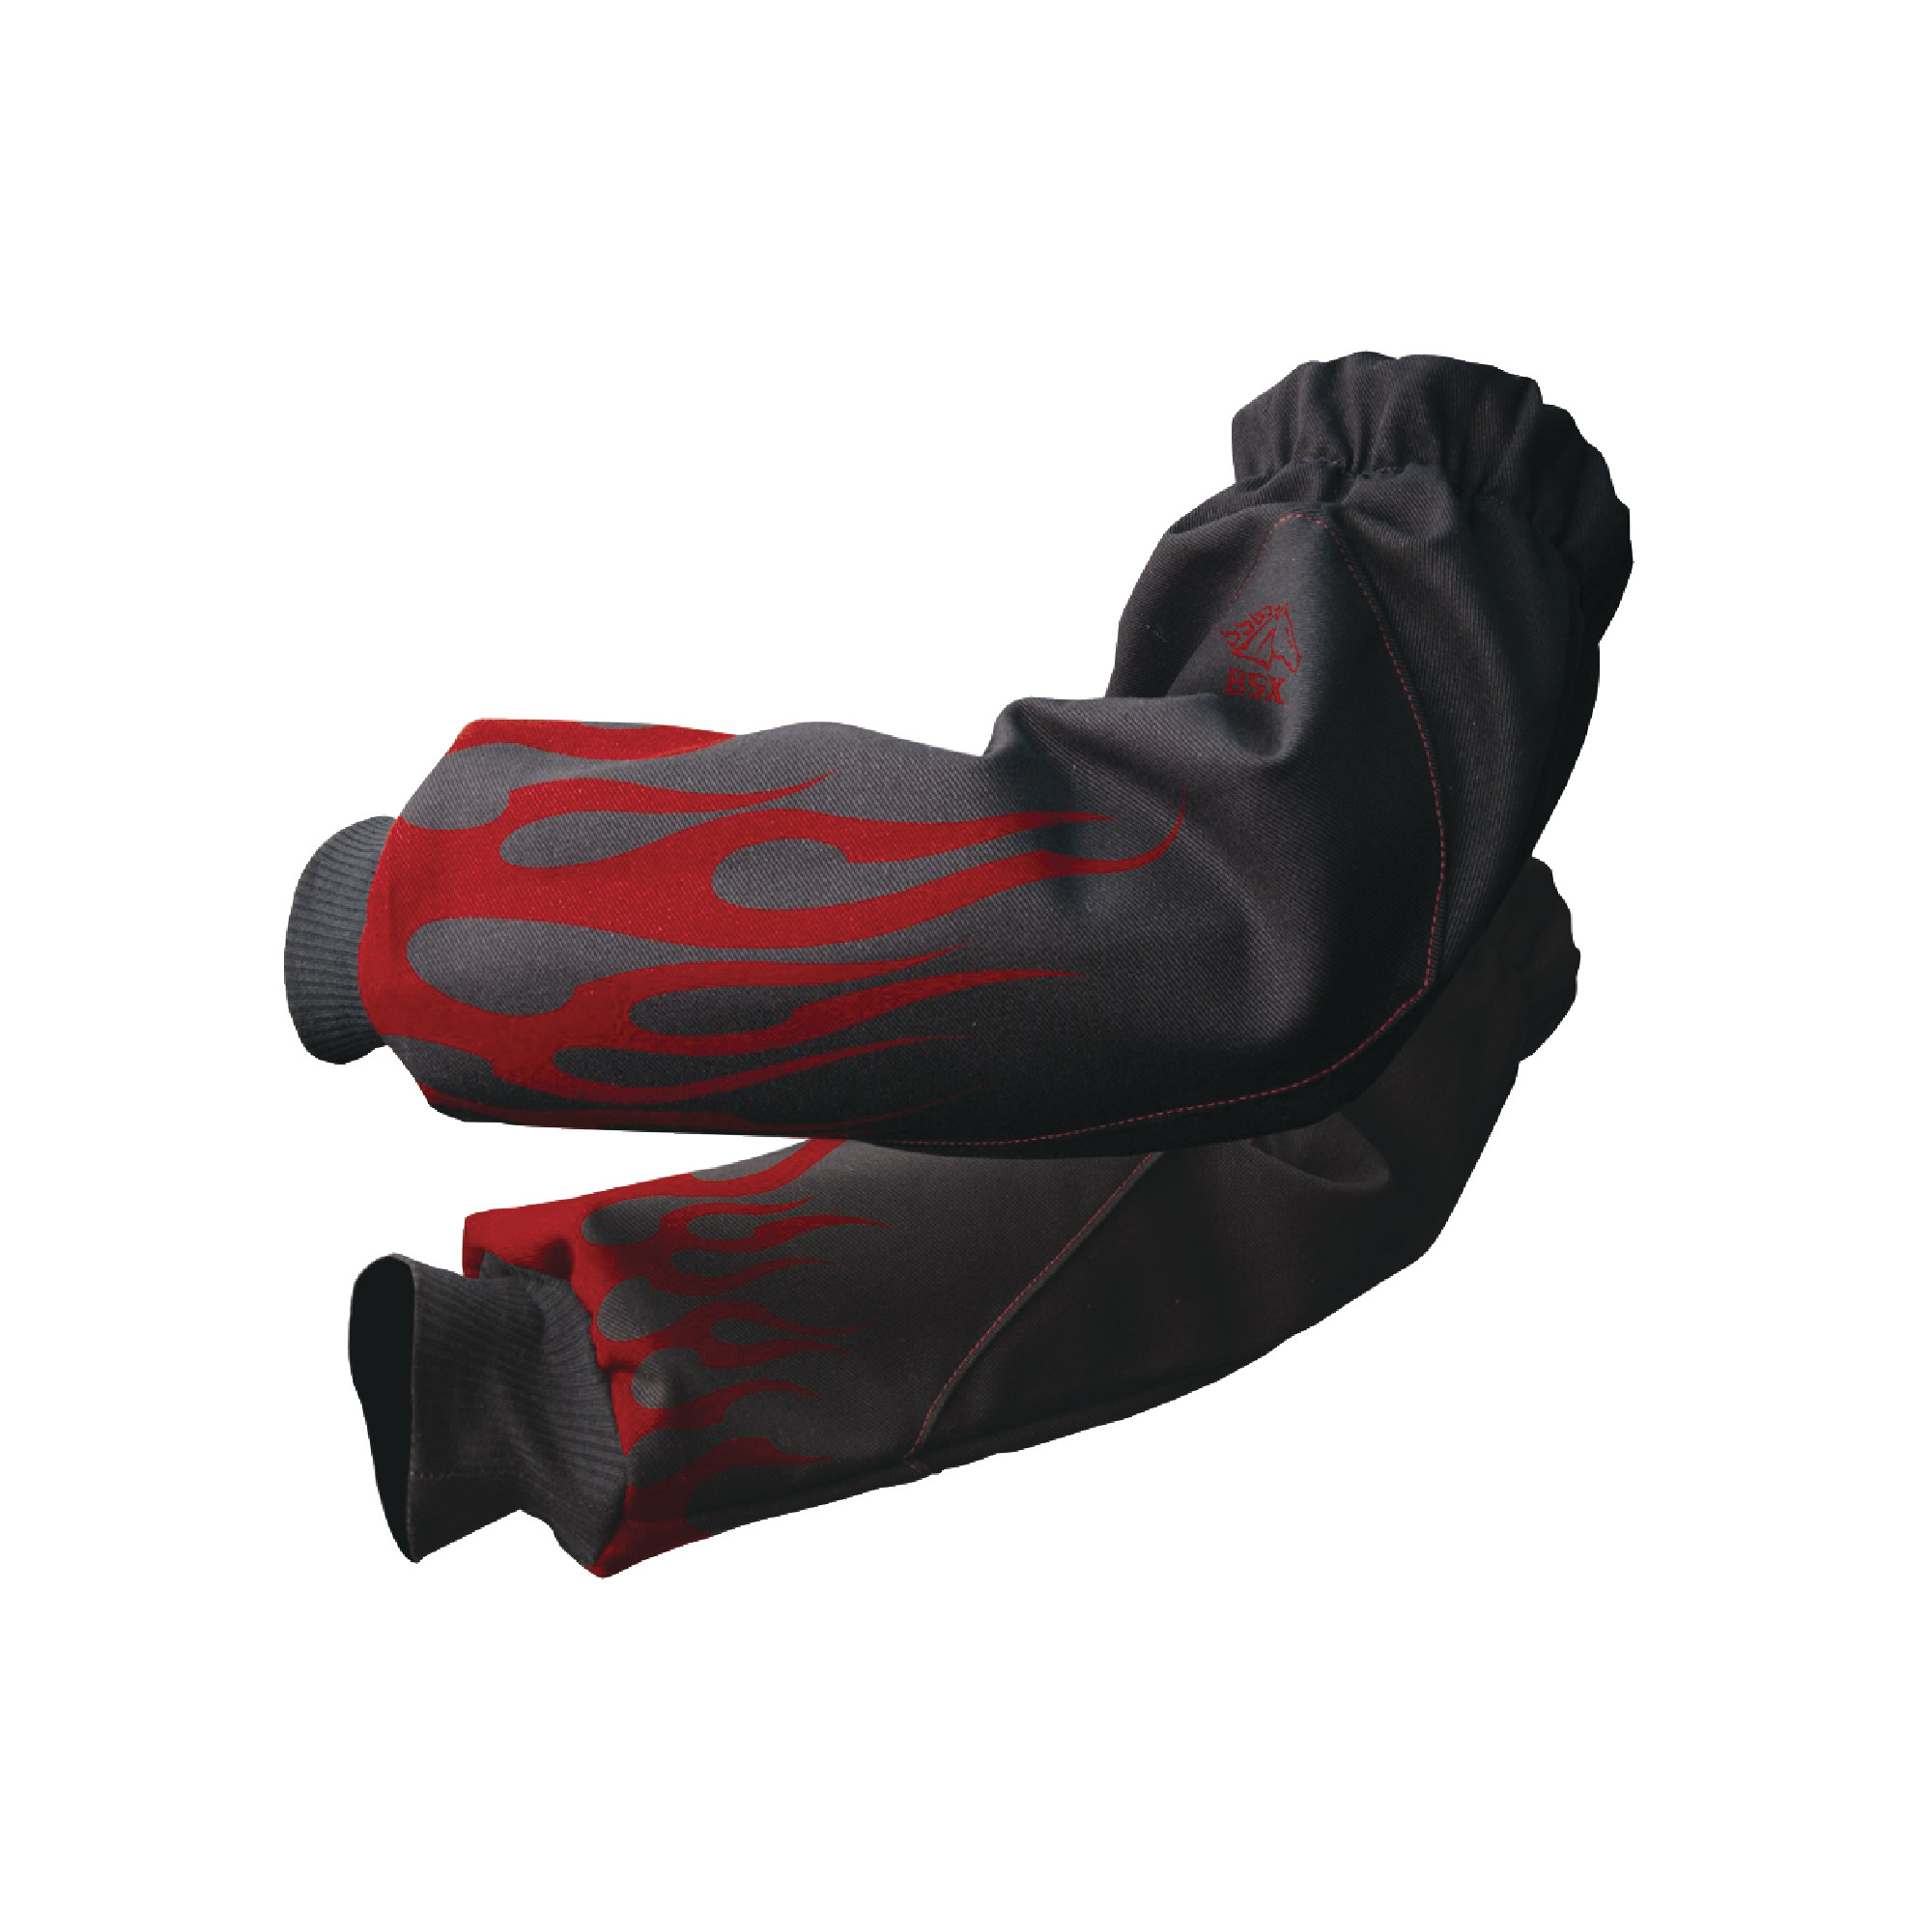 BSX Fire Resistant Sleeve Extenders - Black With Red Flames